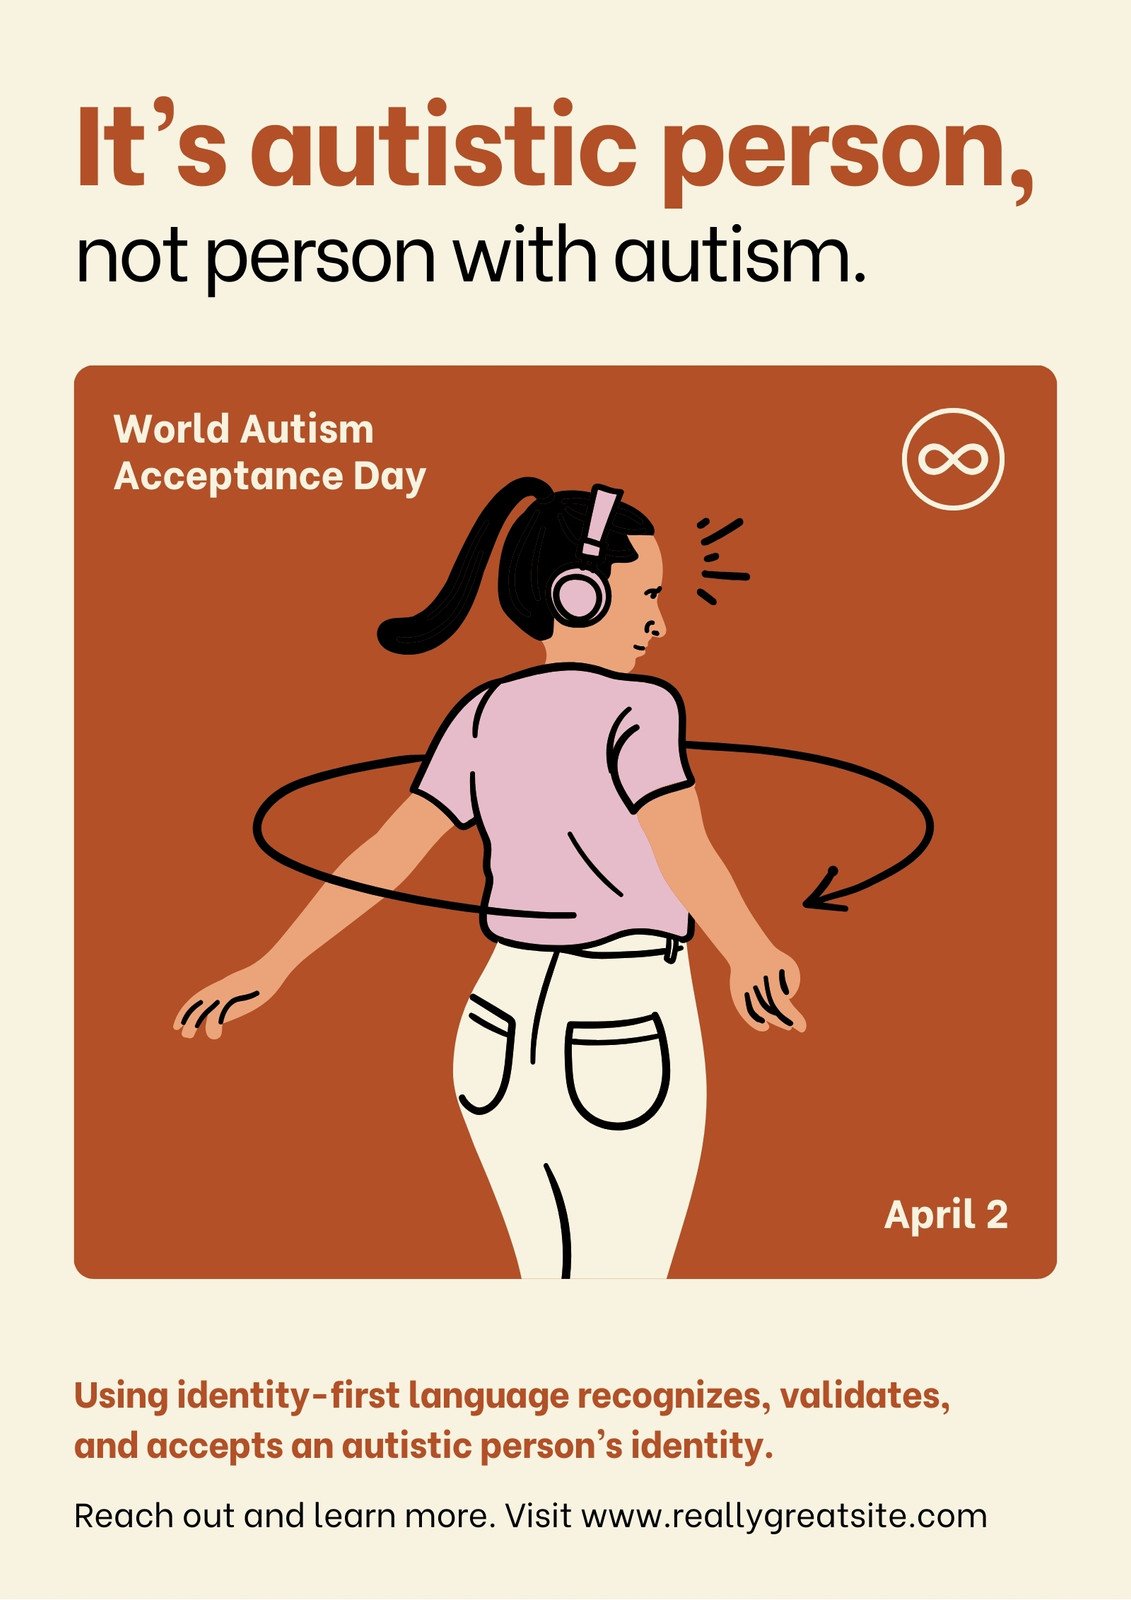 Customize 16+ World Autism Awareness Day Posters Templates Online - Canva